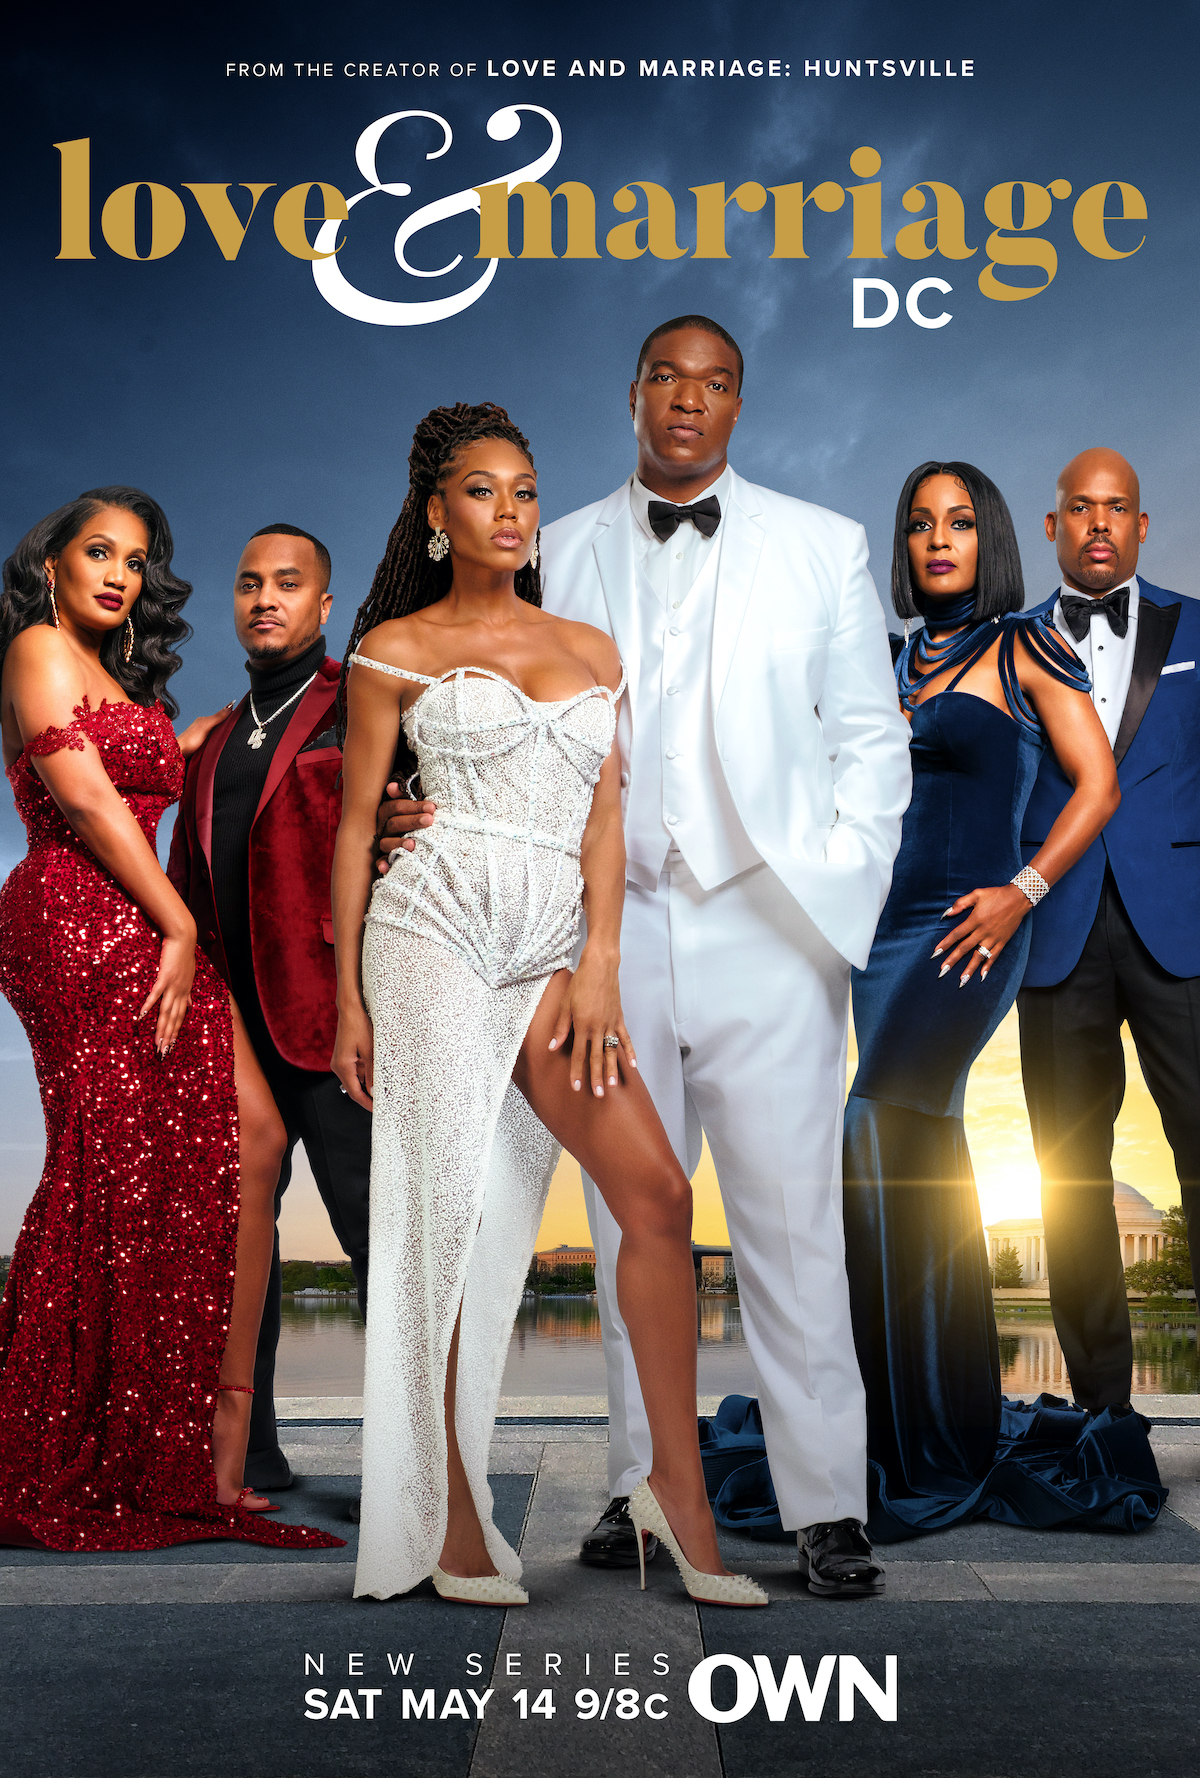 ‘Love & Marriage D.C.’ Exclusive: Monique Samuels Reveals Reluctance To Return To Reality TV